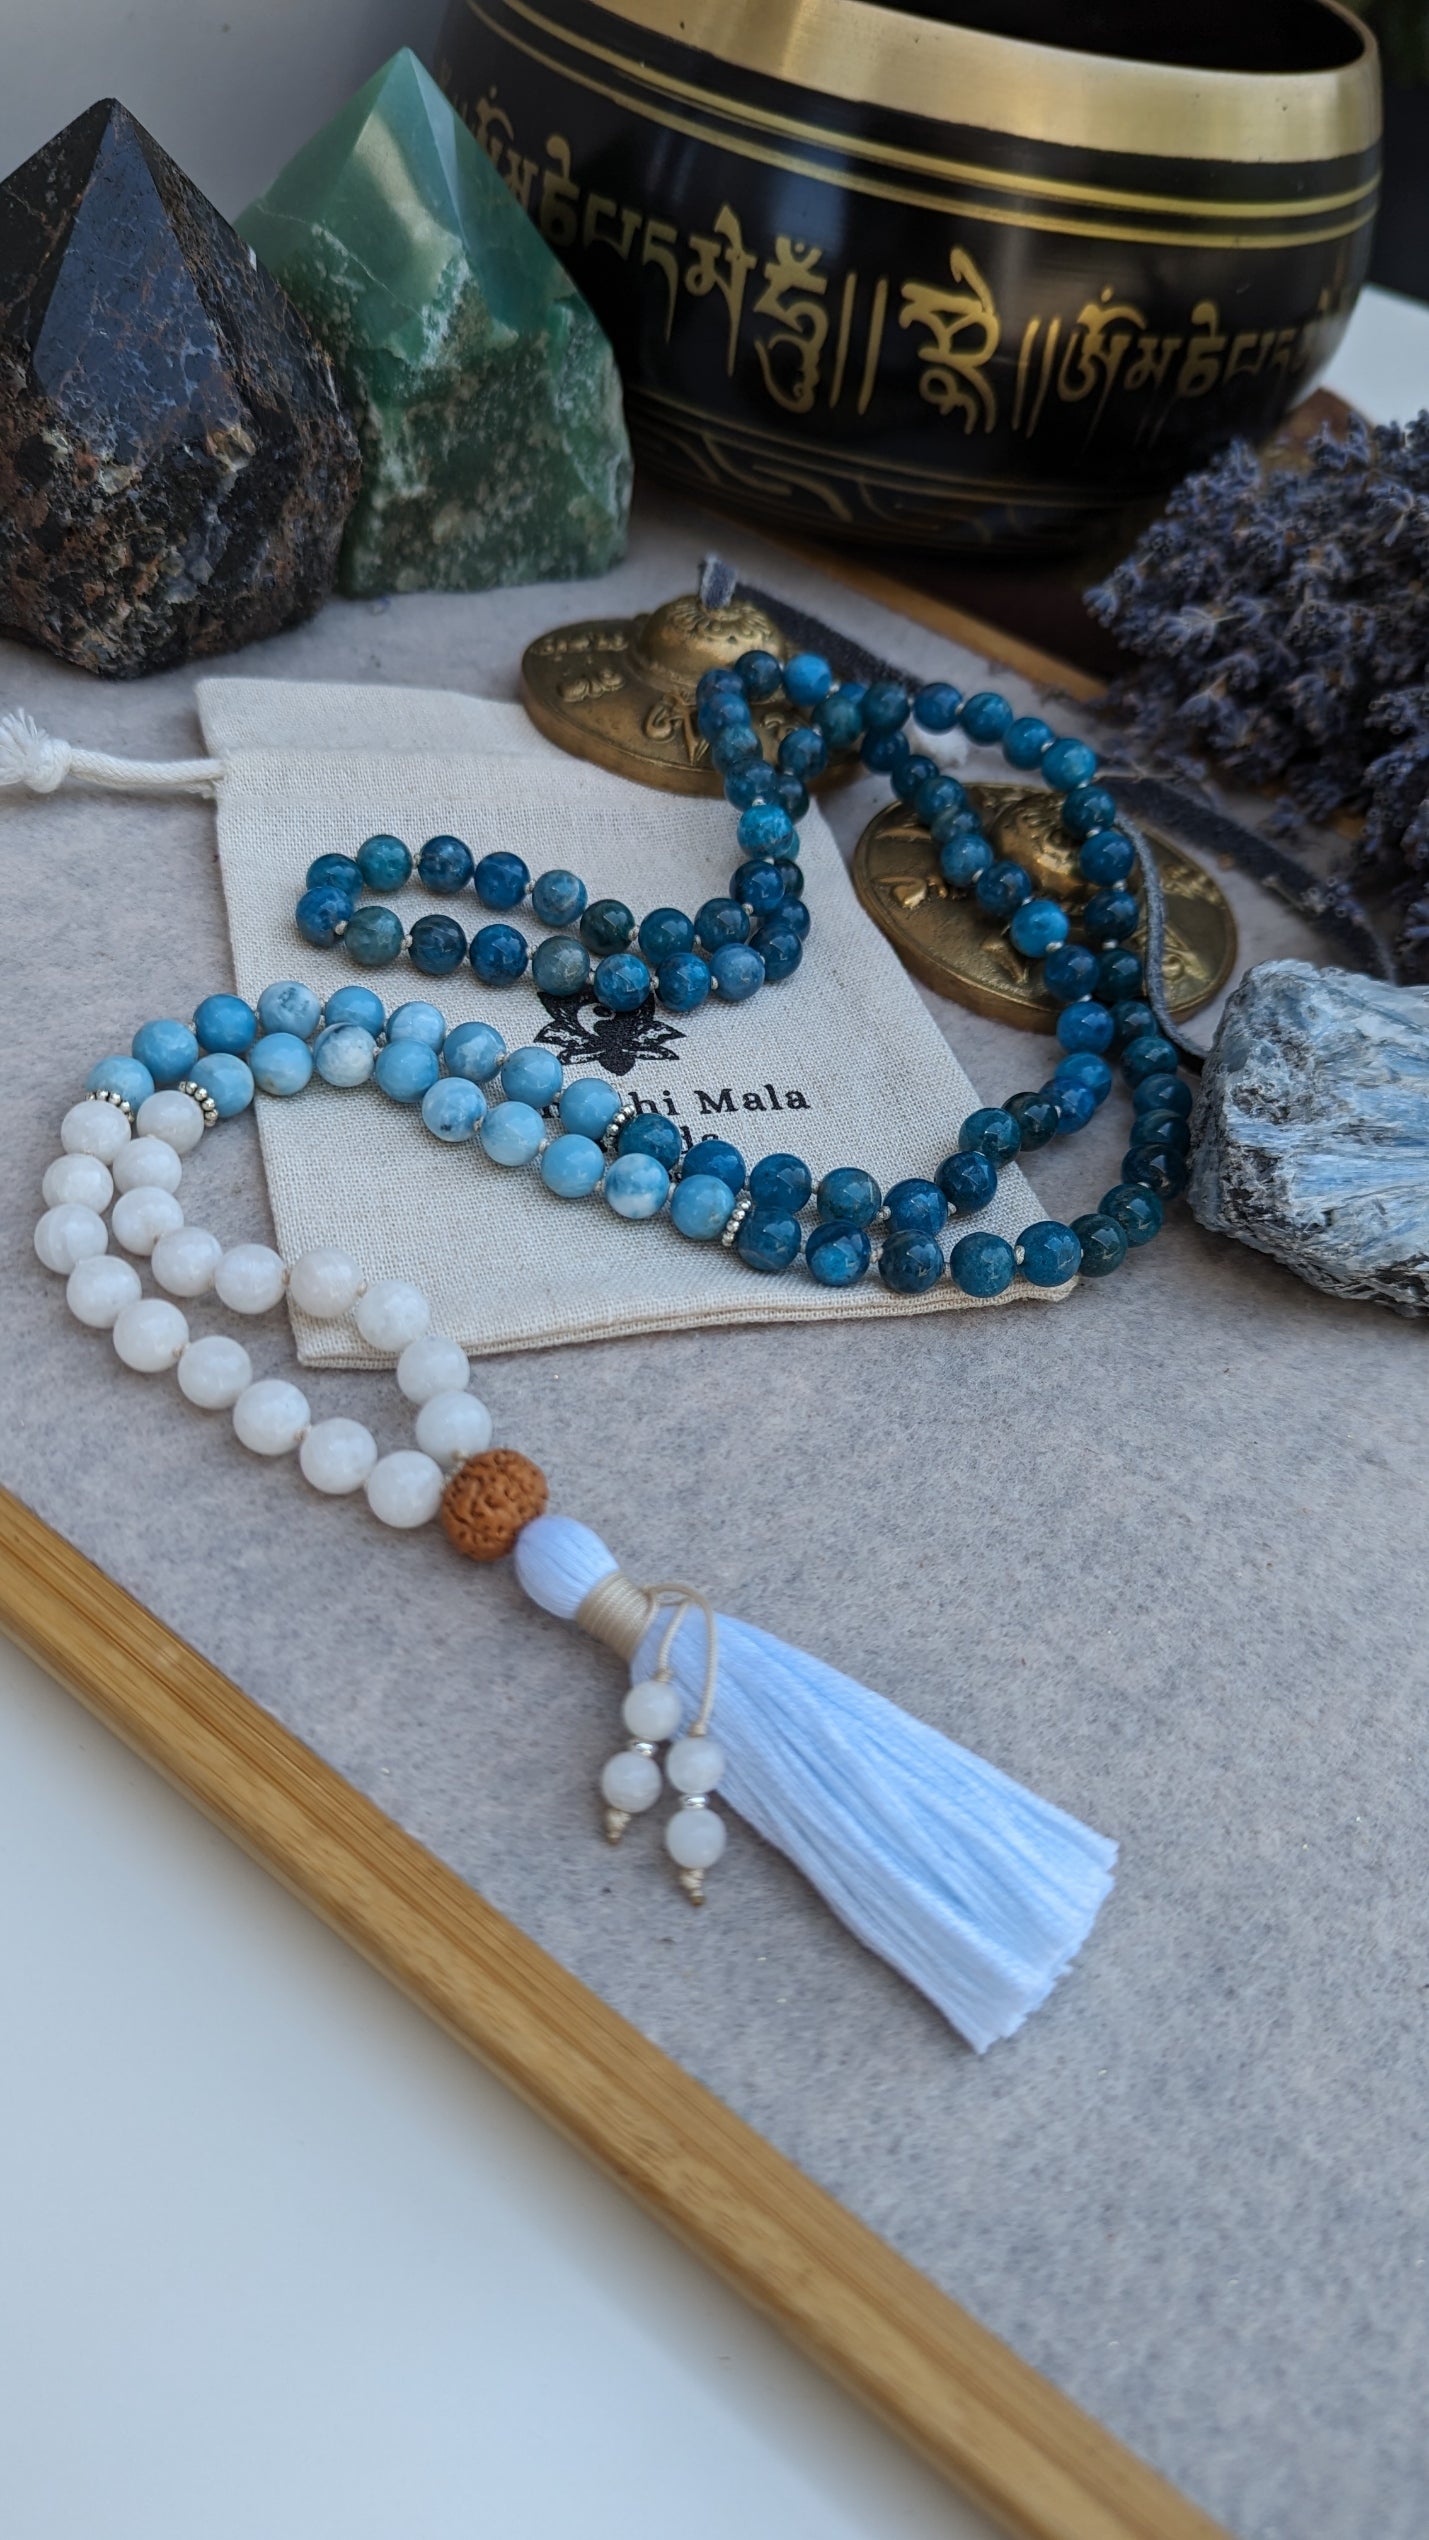 Real and Authentic 108 Mala Beads Buddhist Necklace